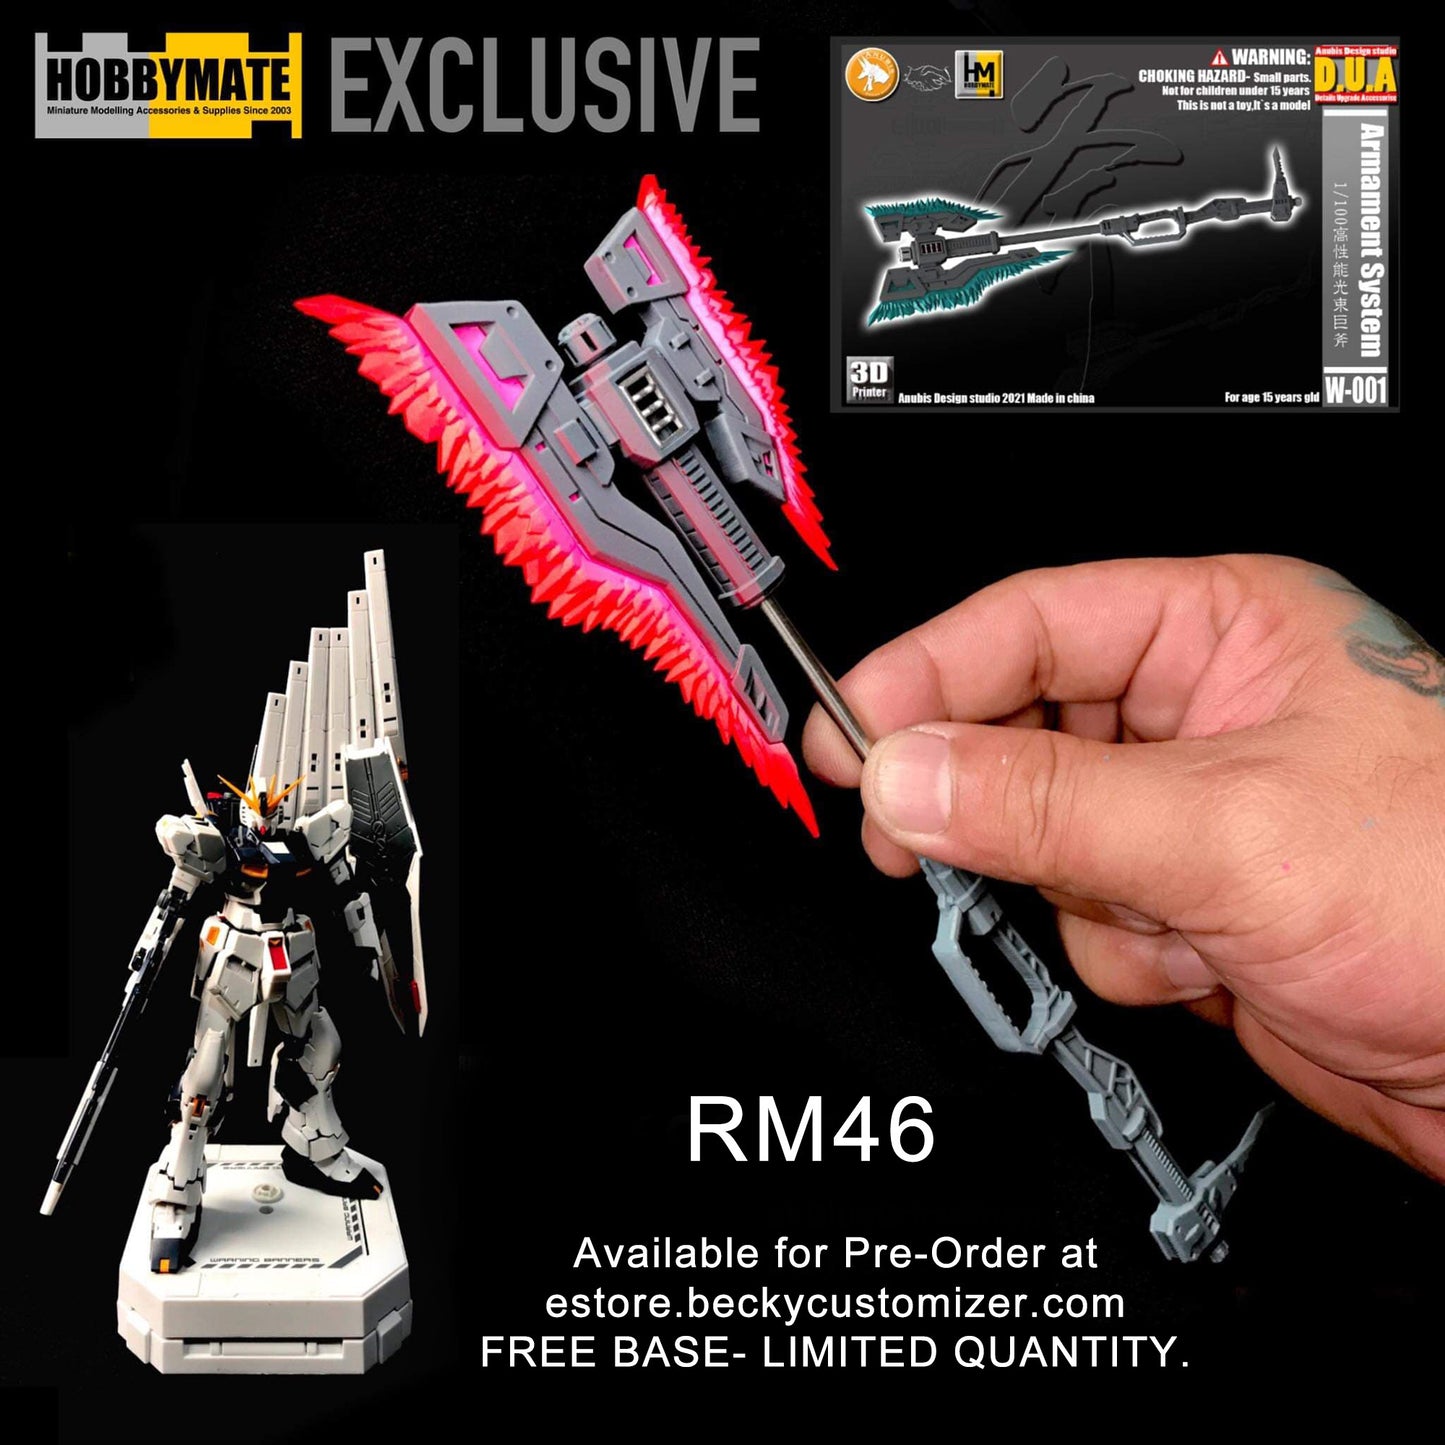 D.U.A Power Axe for MG (HM Exclusive product)